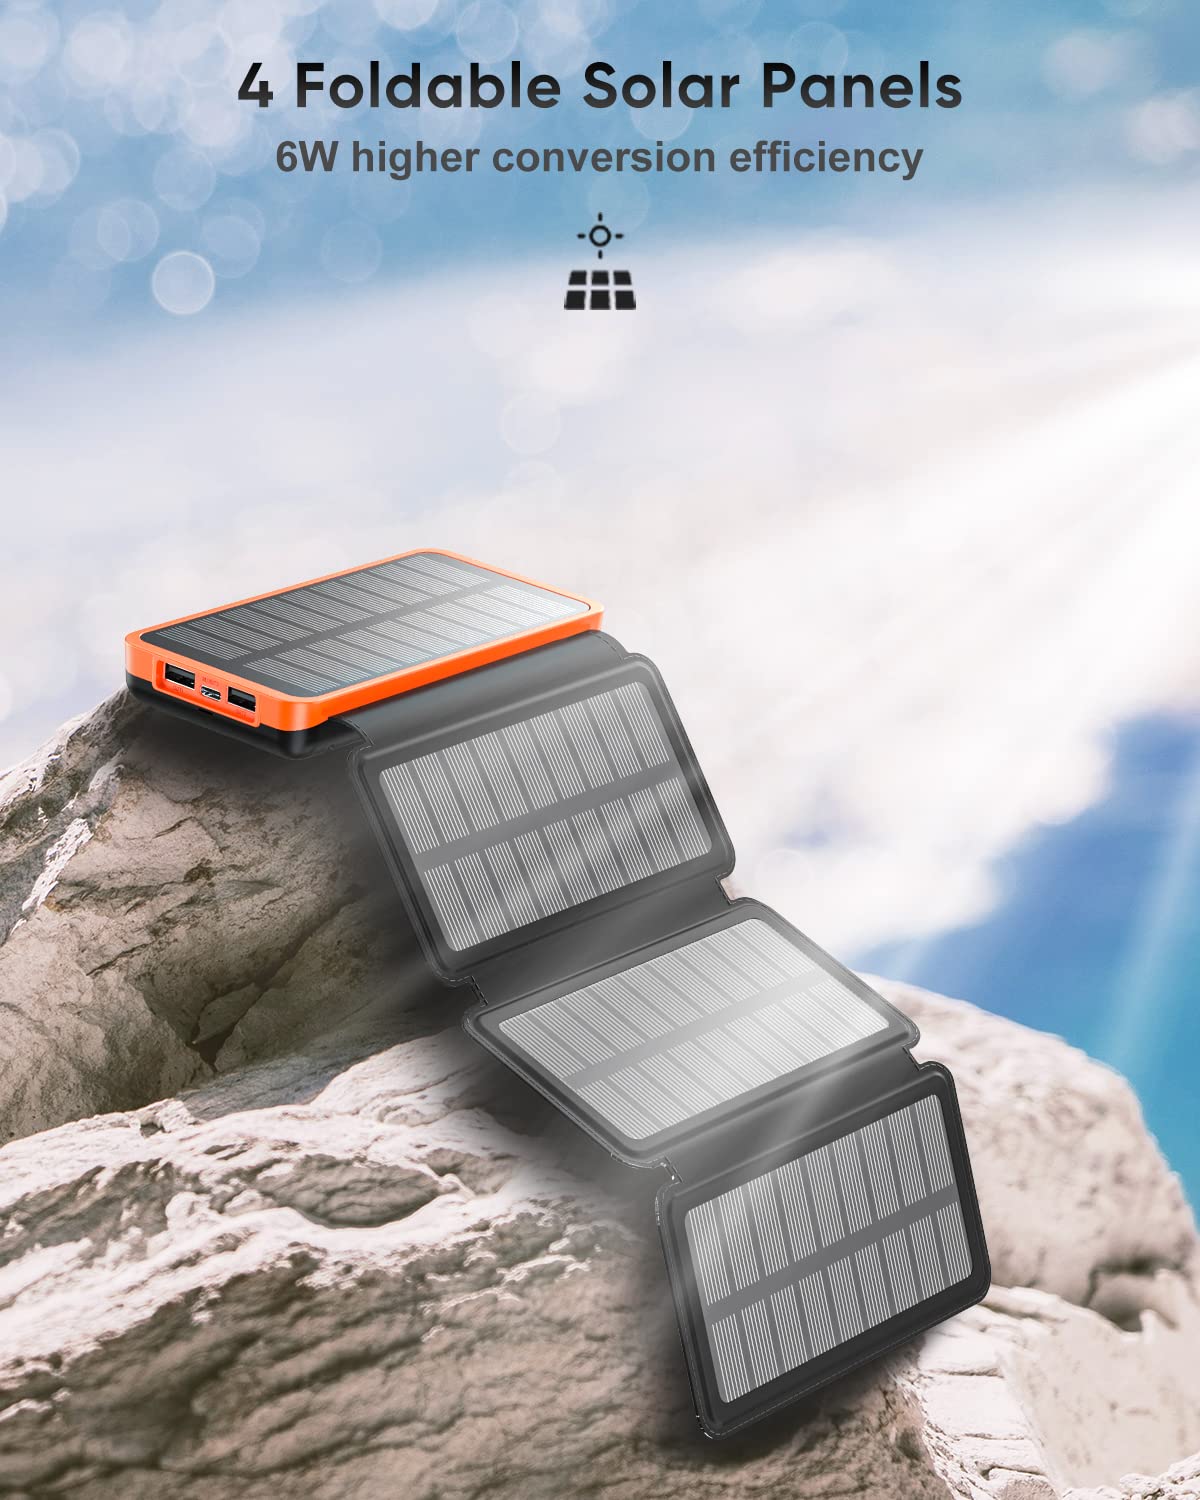 Solar Charger 25000mAh, Hiluckey Outdoor USB C Portable Power Bank with 4 Solar Panels, 3A Fast Charge External Battery Pack with 3 USB Outputs Compatible with Smartphones, Tablets, etc.